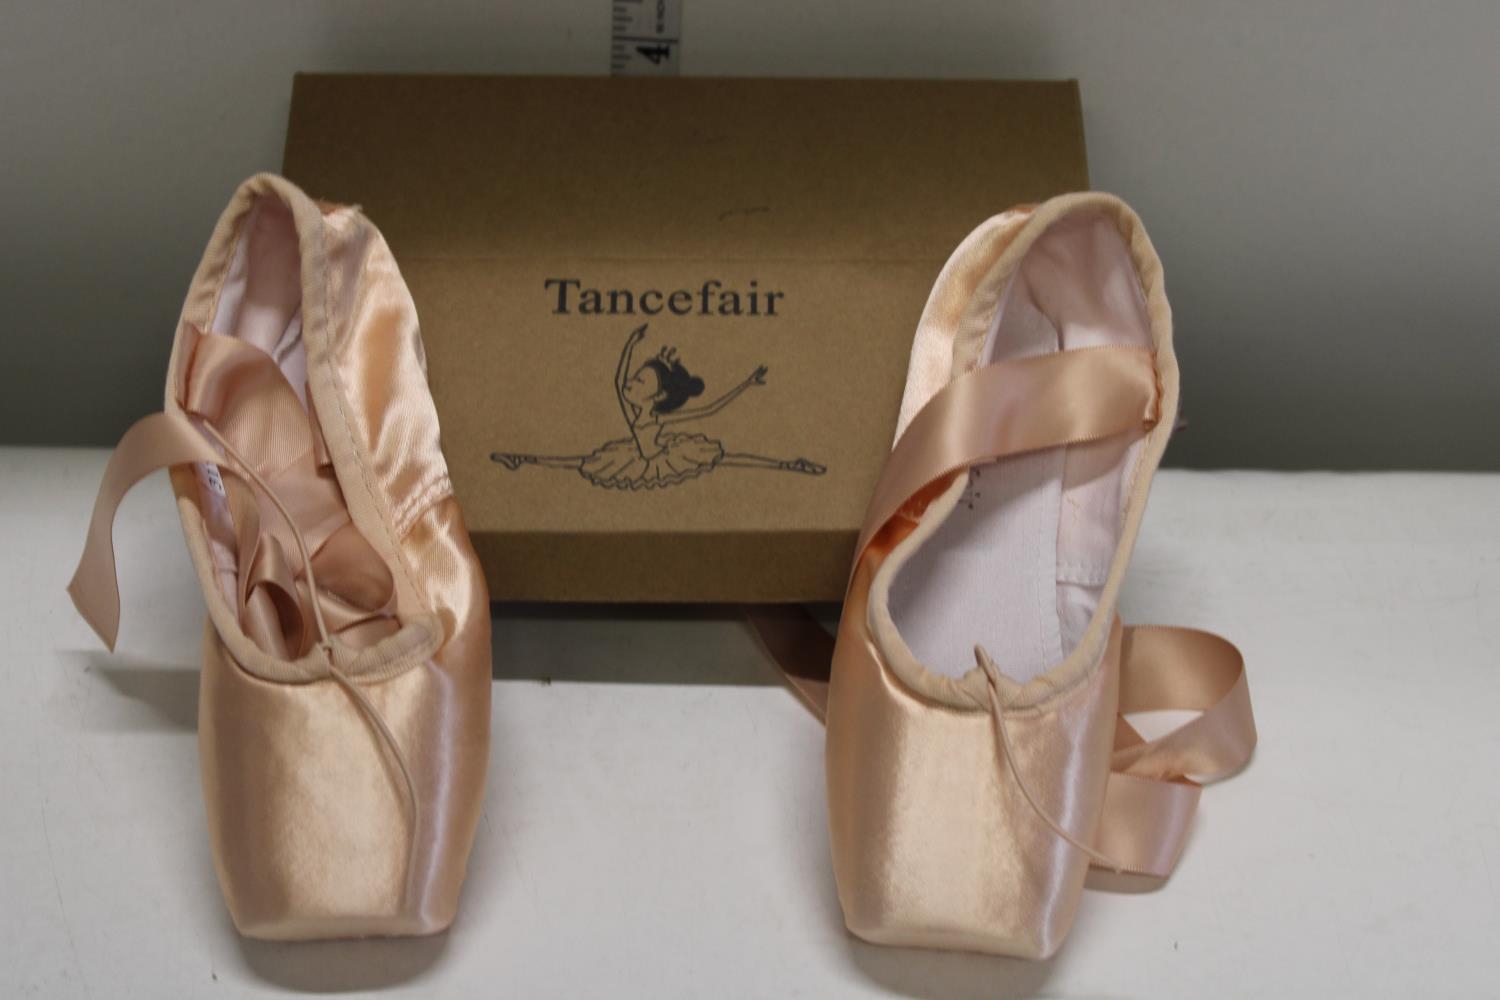 A pair of new ballet shoes size 31